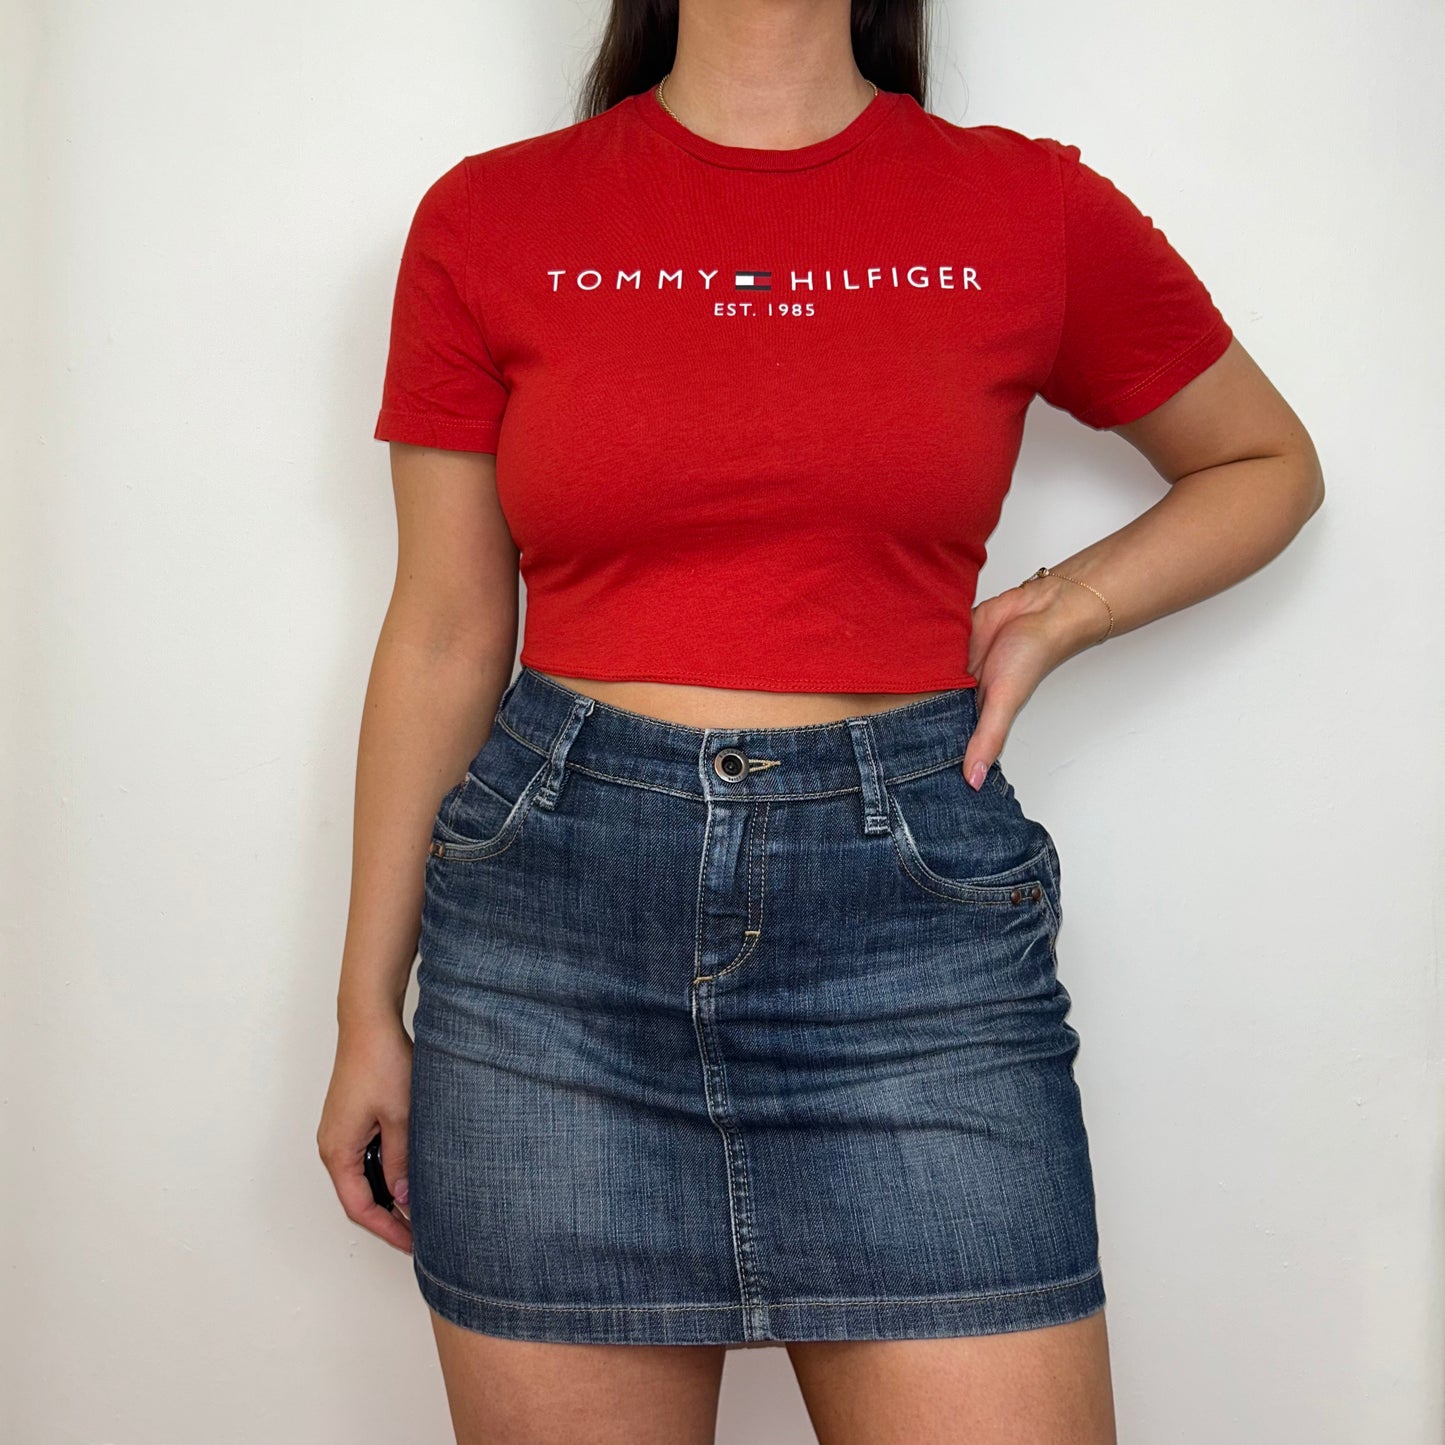 red short sleeve crop top with white tommy hilfiger logo shown on a model wearing a blue denim skirt